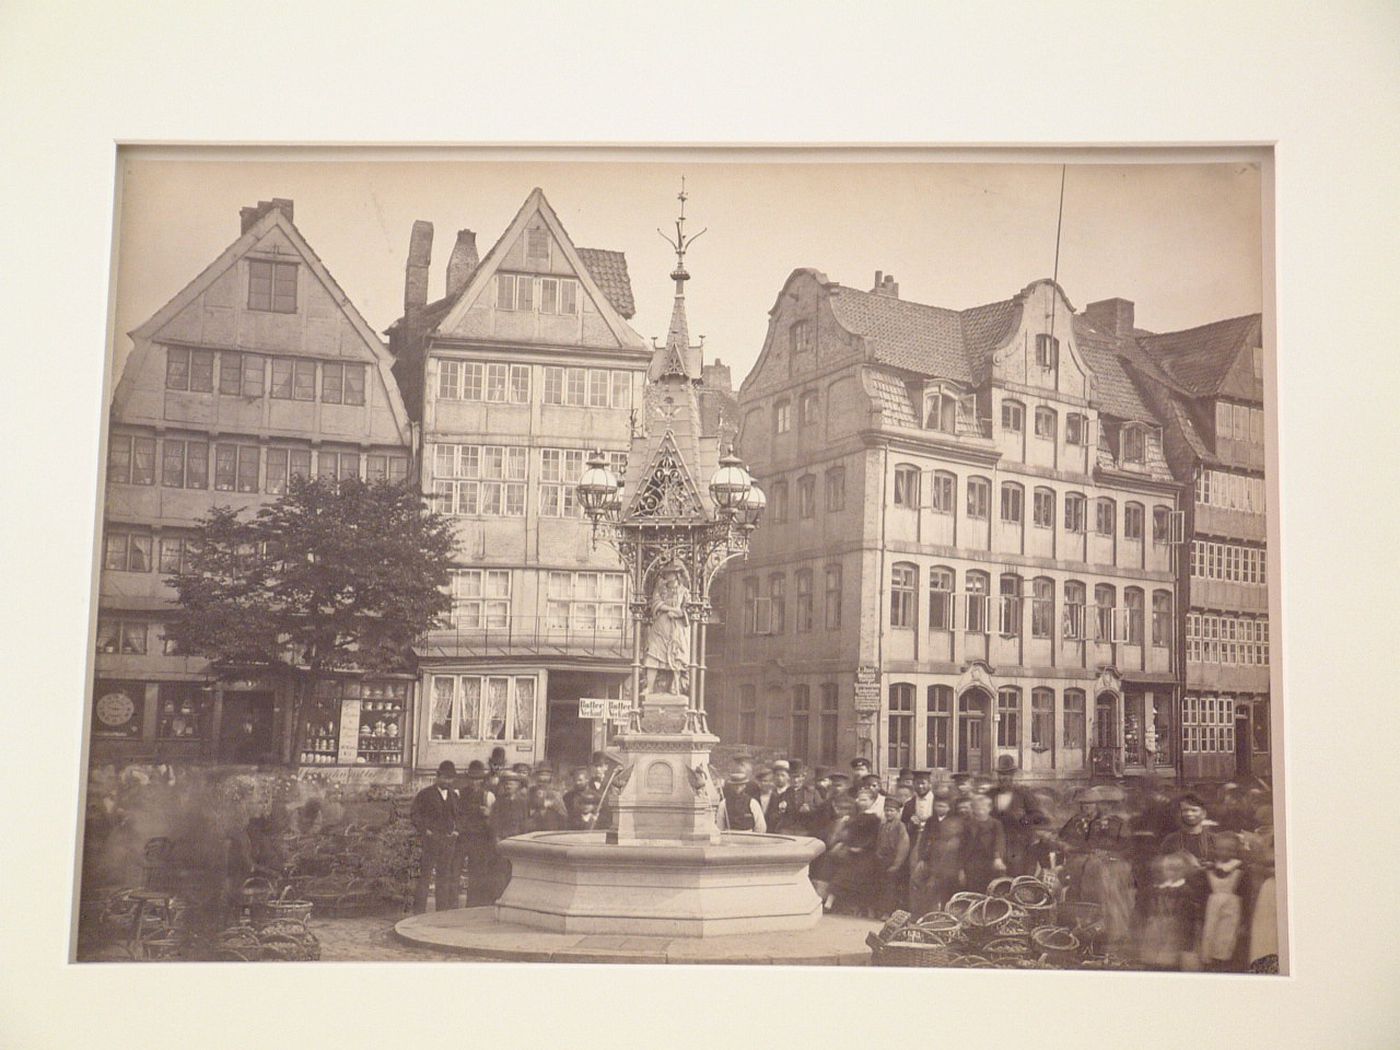 View of fountain and crowd of people in a square, Hamburg, Germany